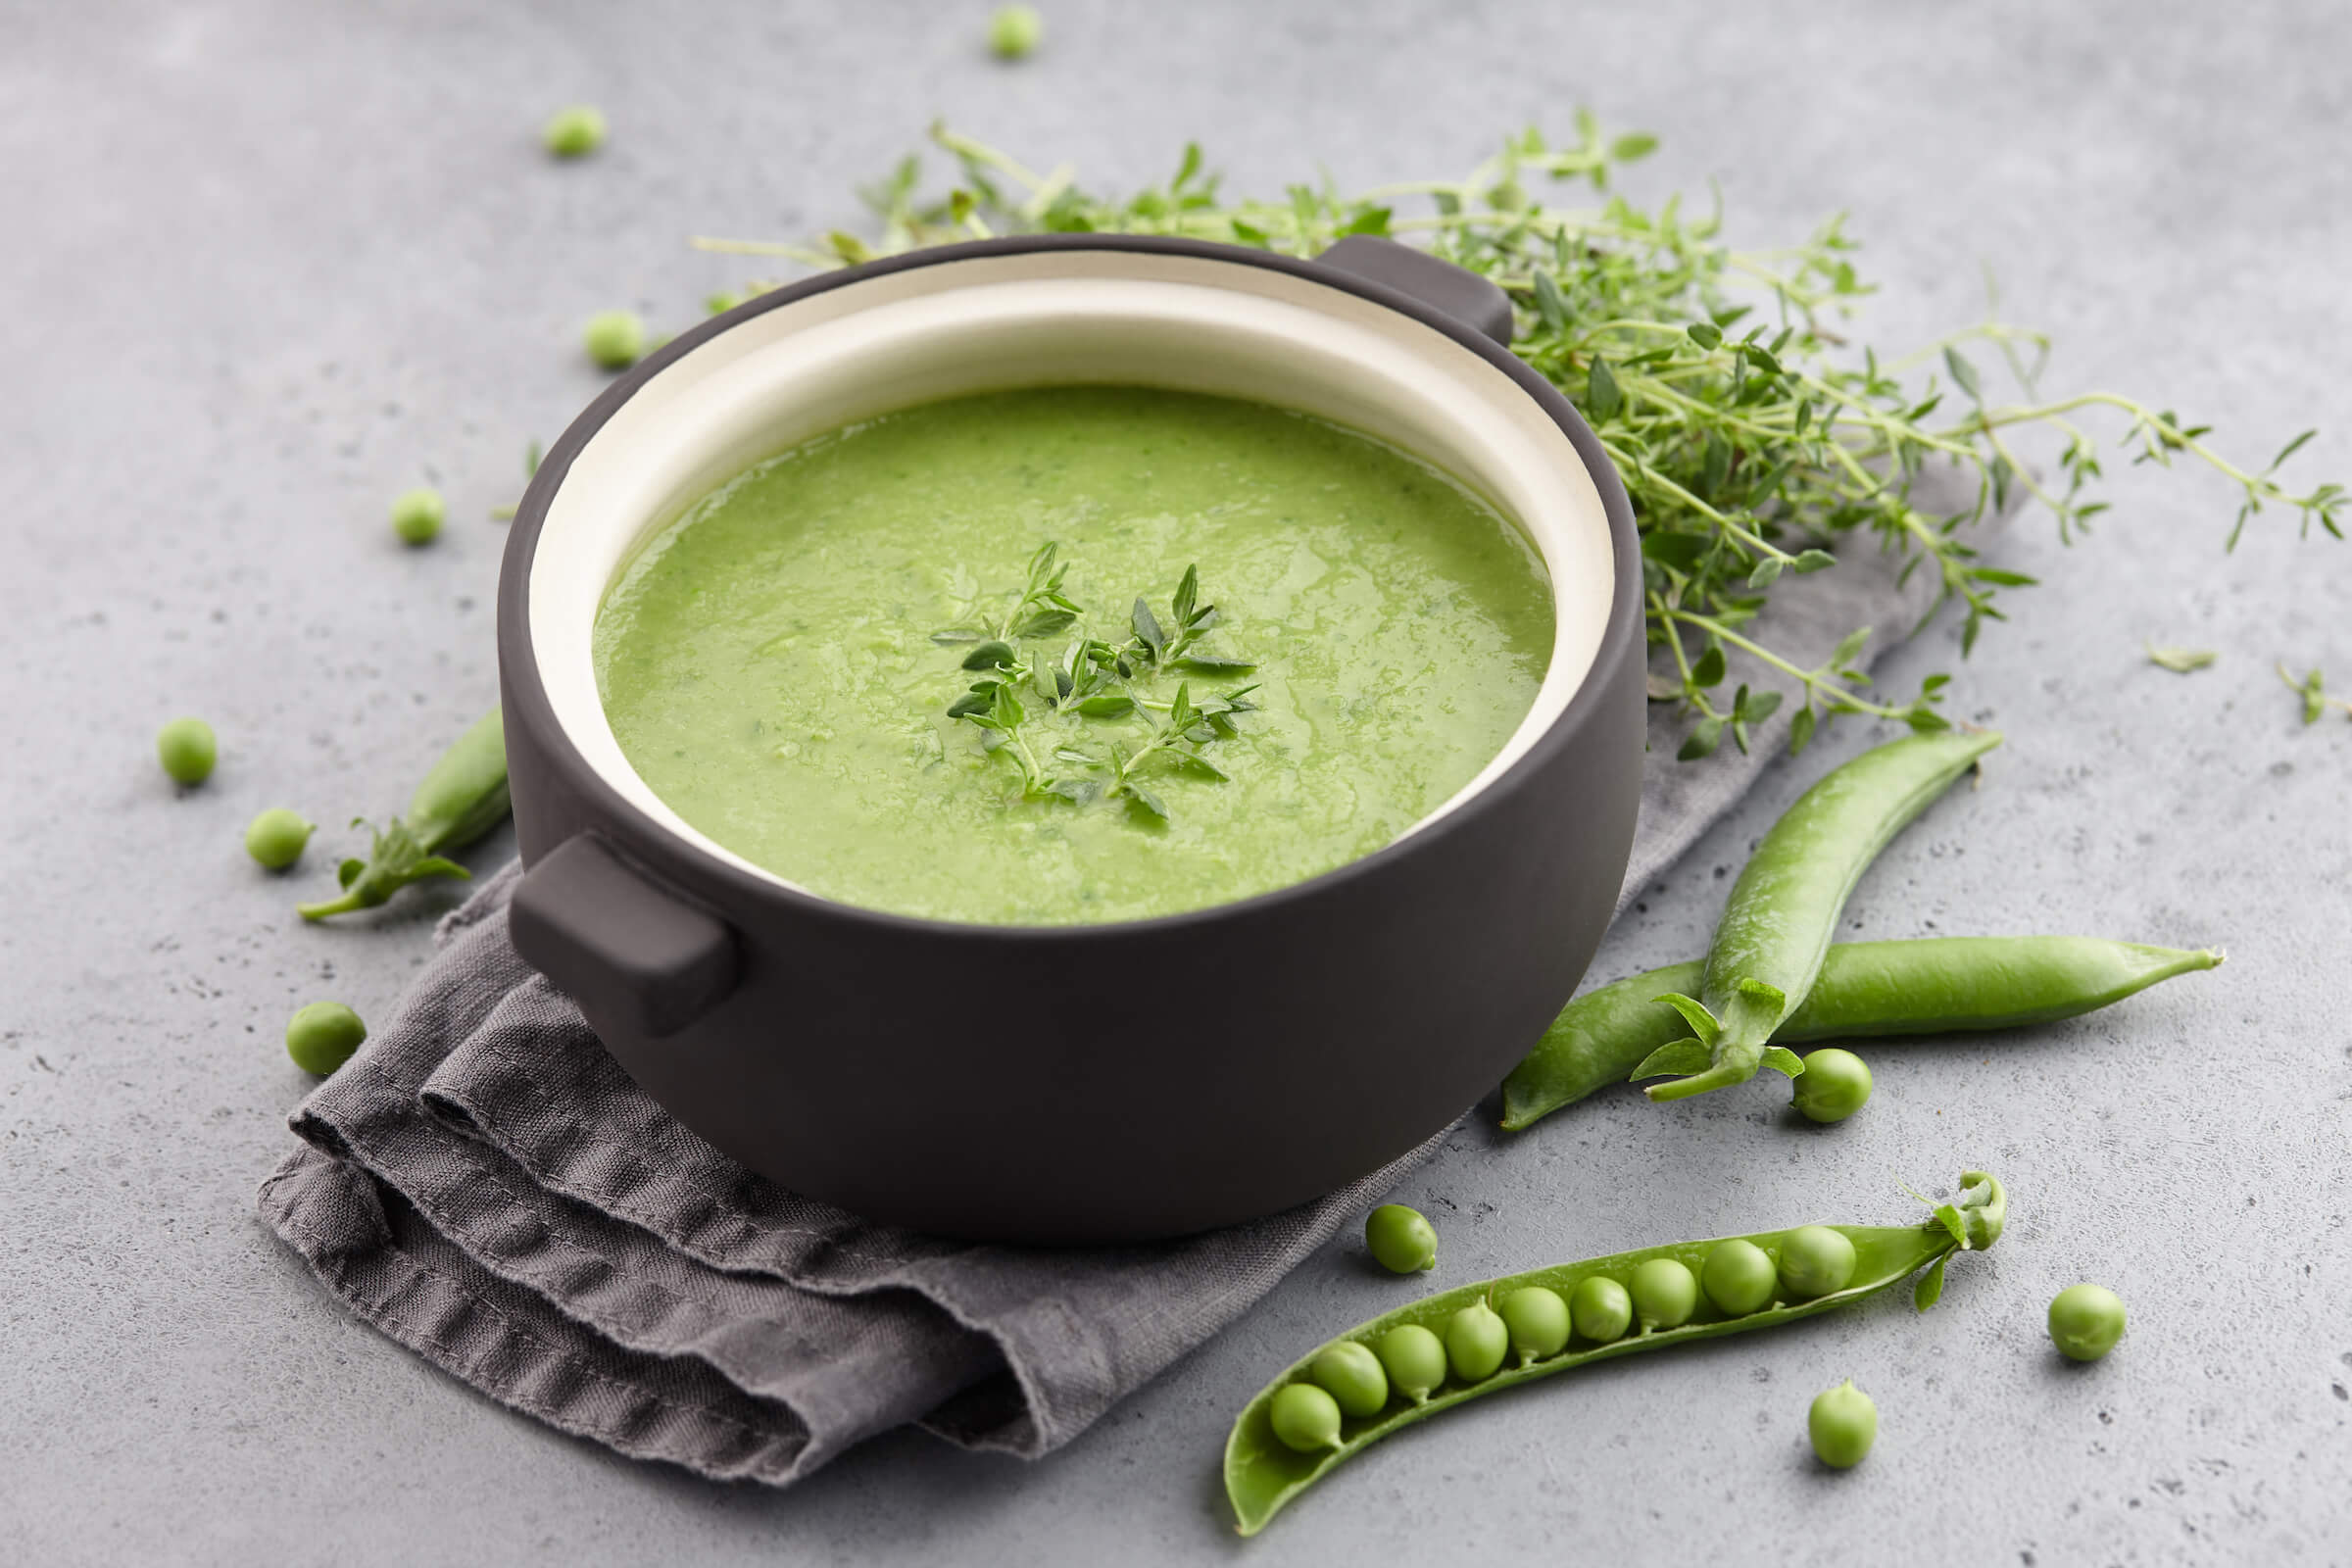 A bowl of fresh green pea soup garnished with herbs, surrounded by pea pods and sprigs of thyme on a gray background.